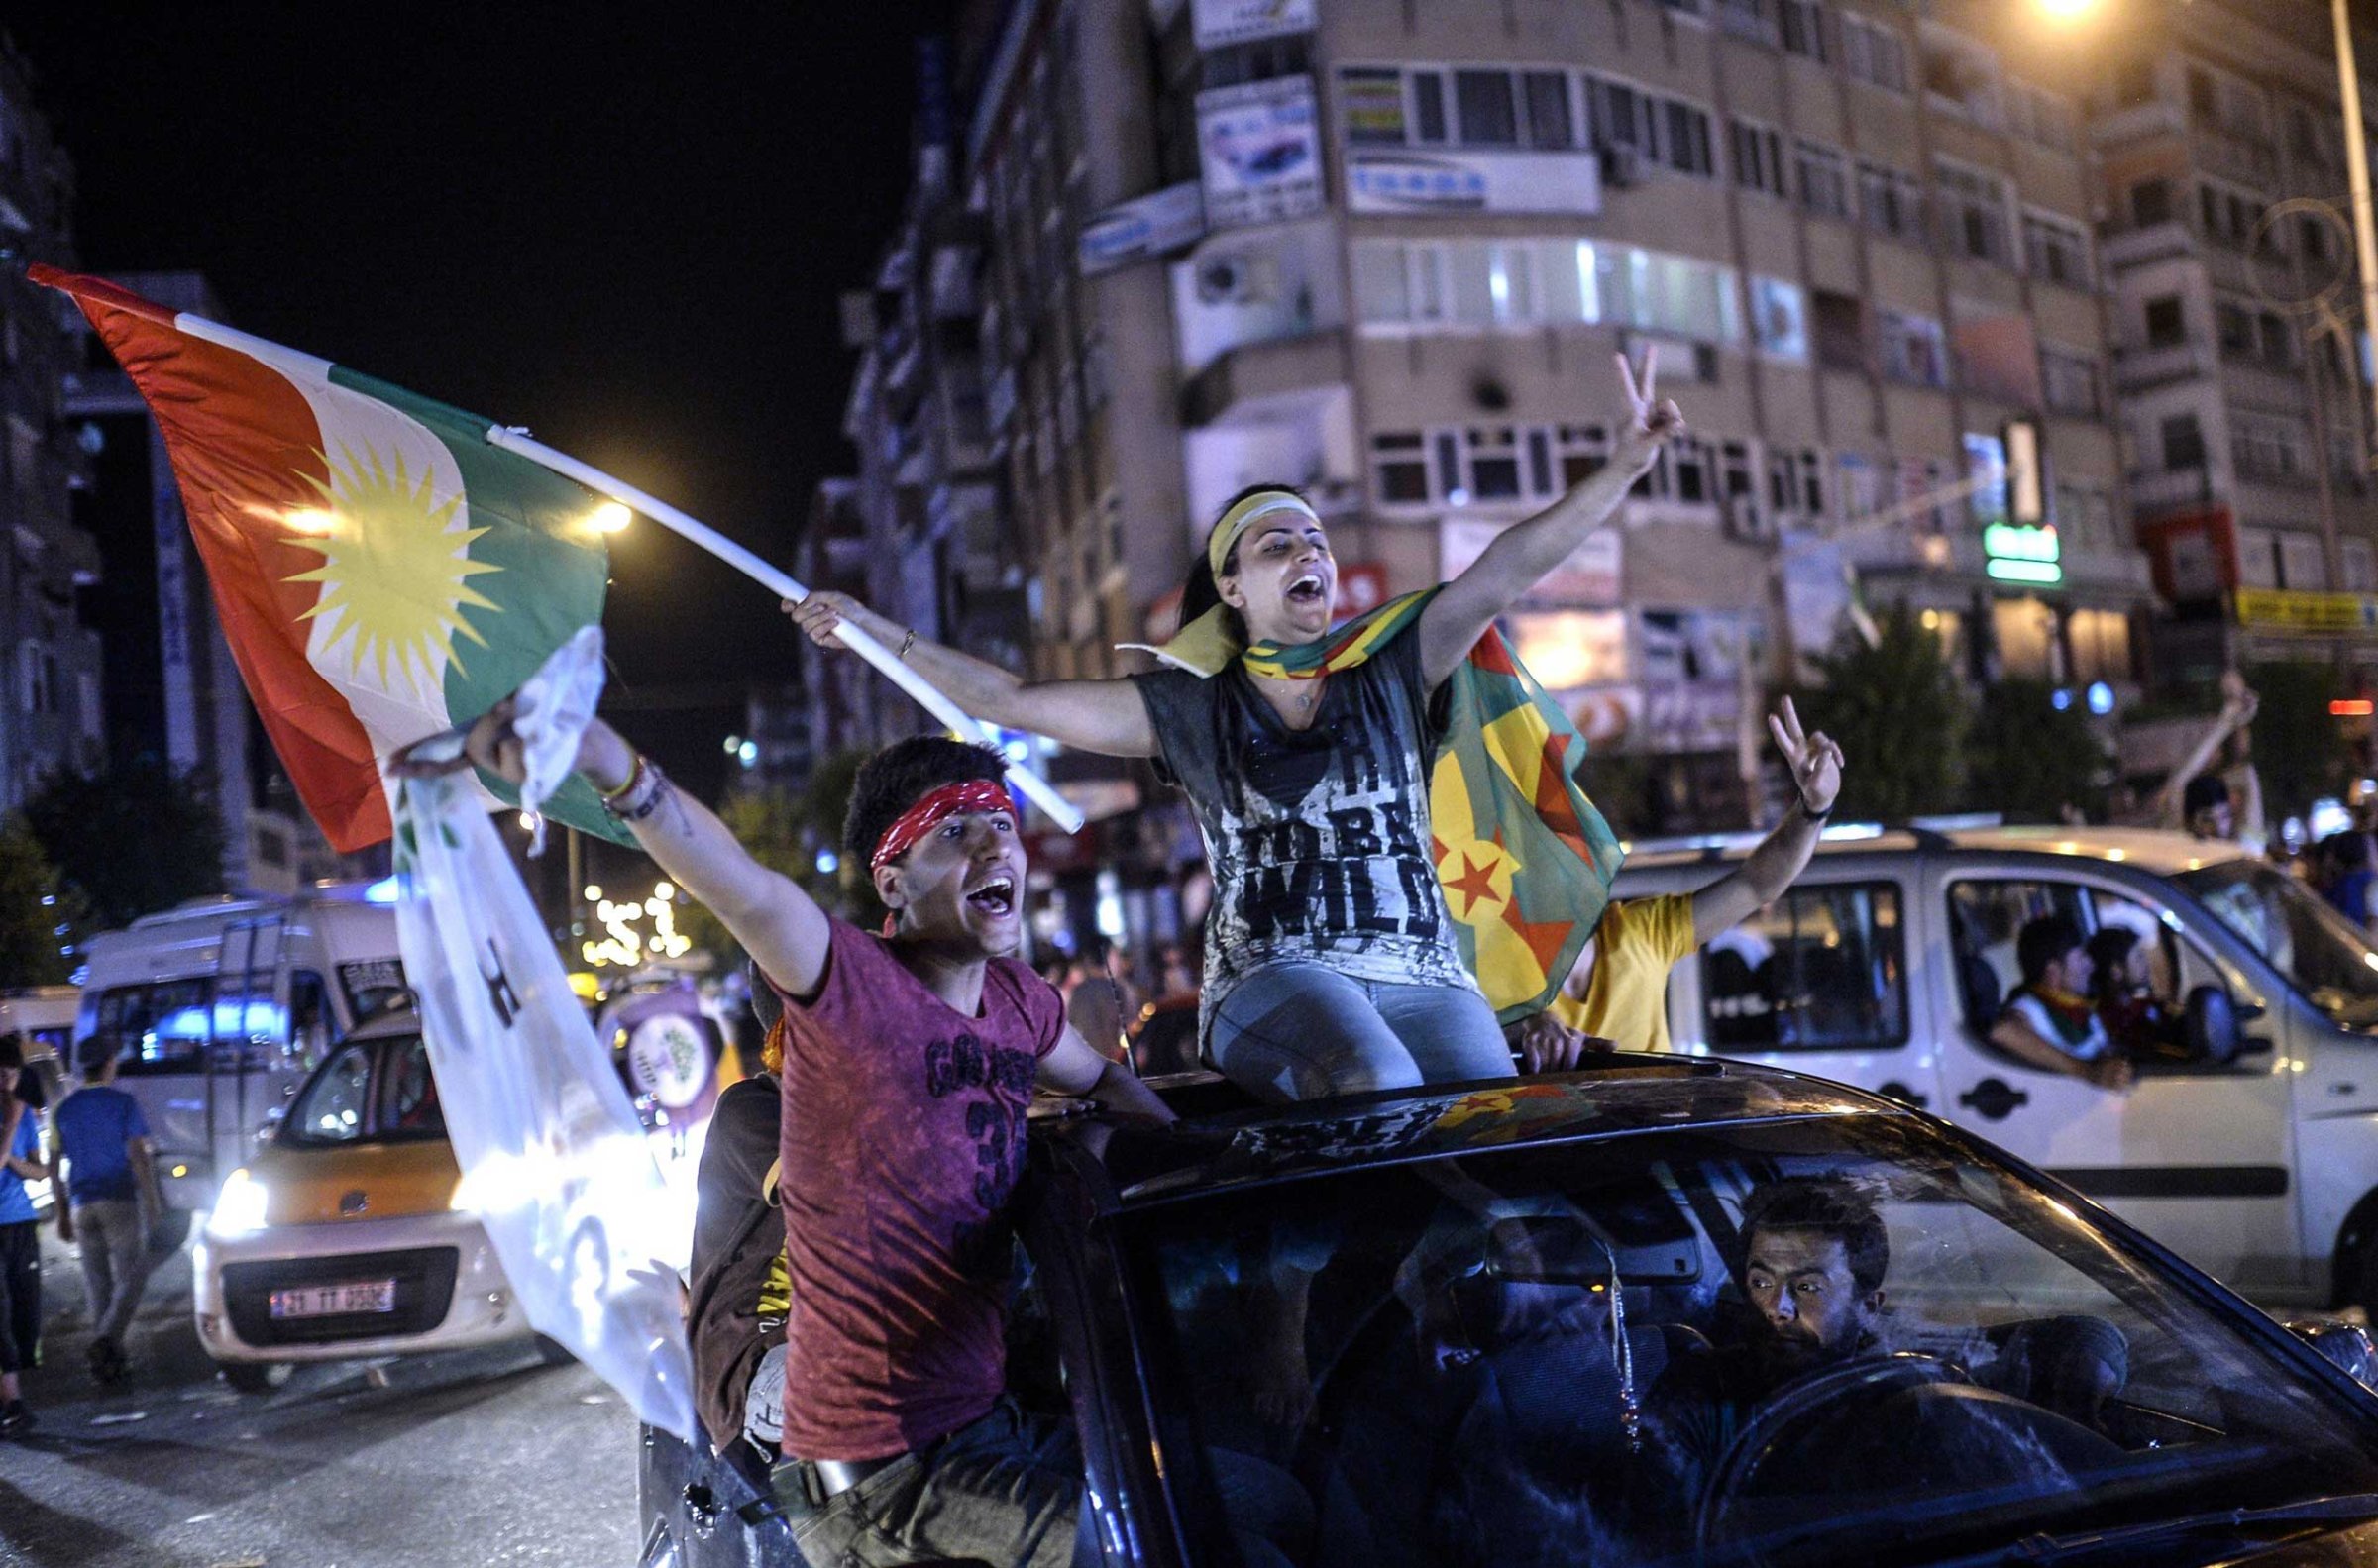 Young supporters of pro-Kurdish Peoples' Democratic Party (HDP) hold Kurdish flags as they celebrate the results of the legislative election, in Diyarbakir in Turkey on June 7, 2015.